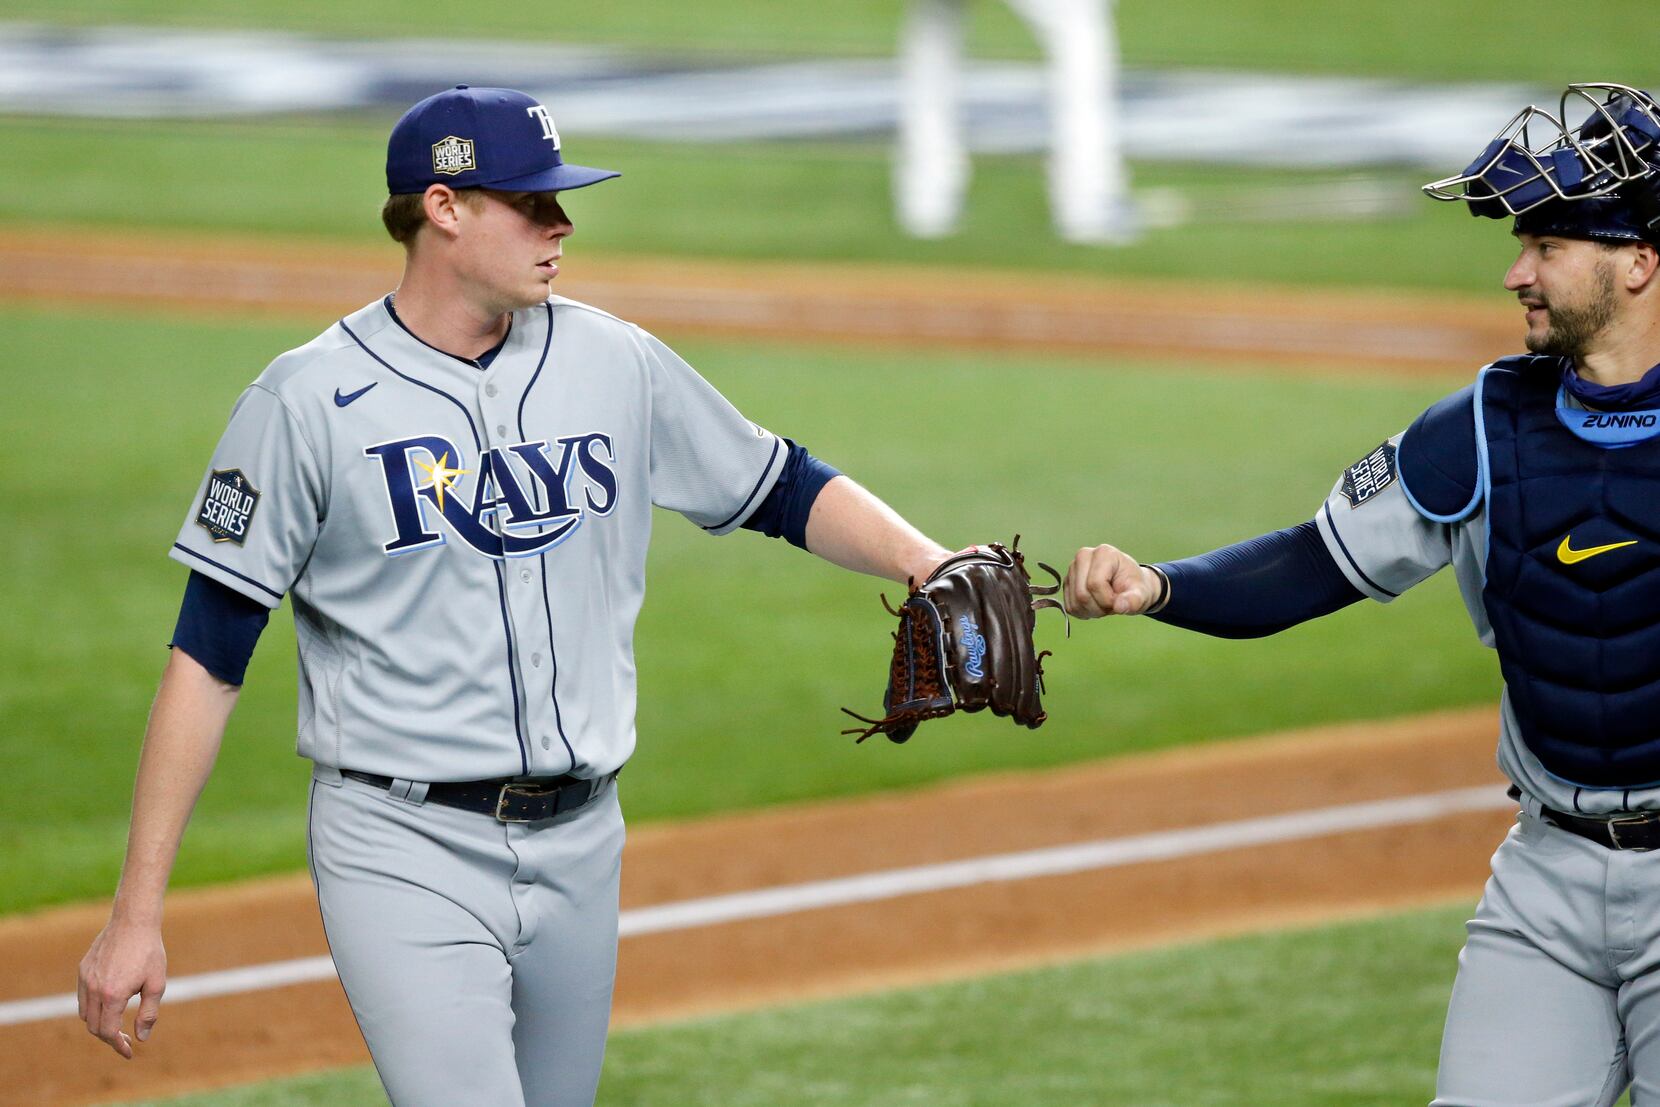 Remember the 2020 Rays-Dodgers World Series? Friday, they meet again